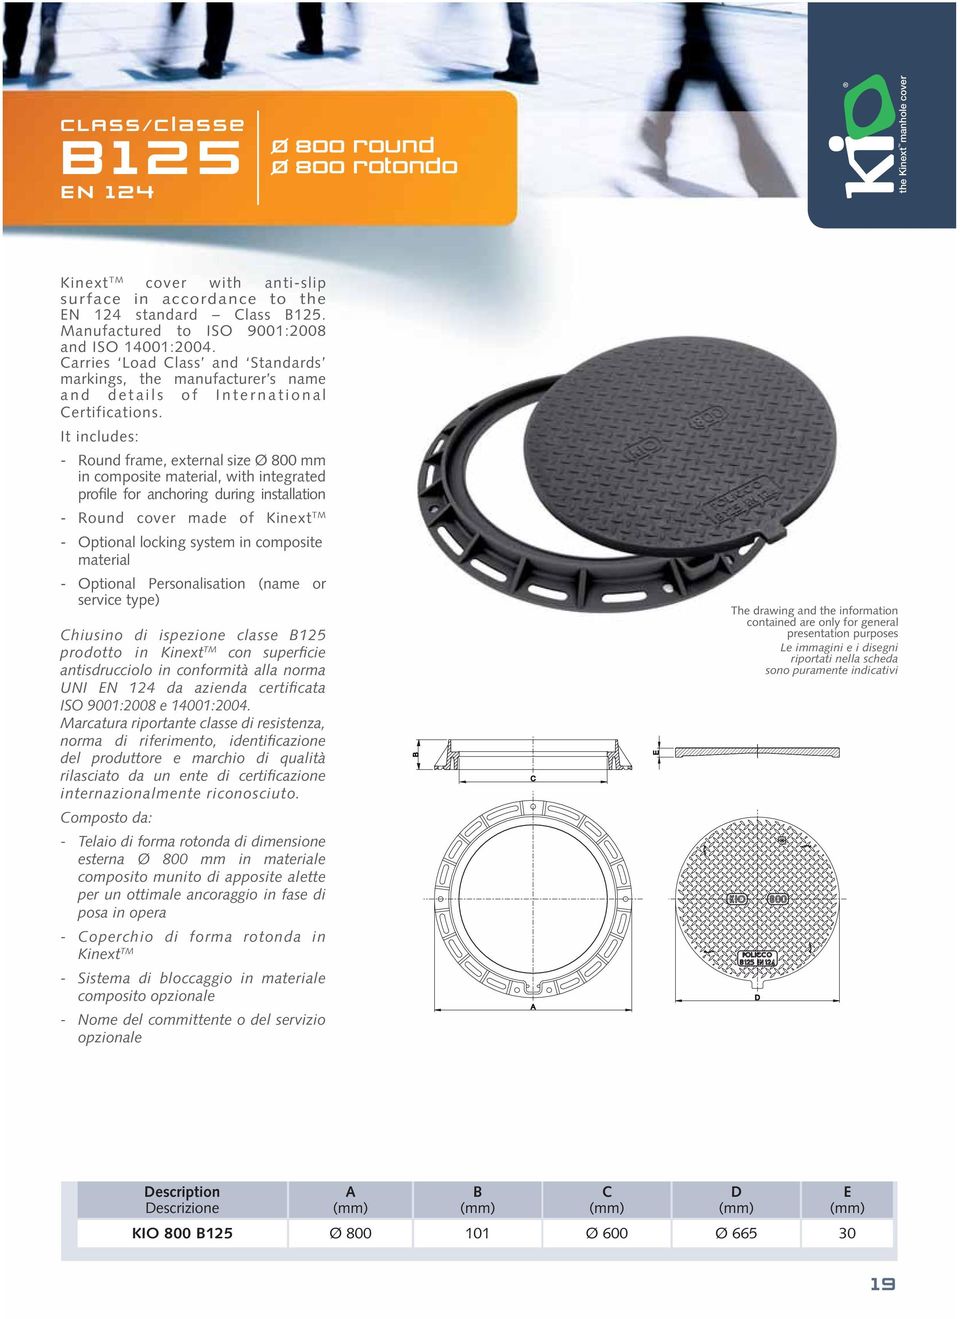 It includes: - Round frame, external size Ø 800 mm in composite material, with integrated profile for anchoring during installation - Round cover made of Kinext TM - Optional locking system in